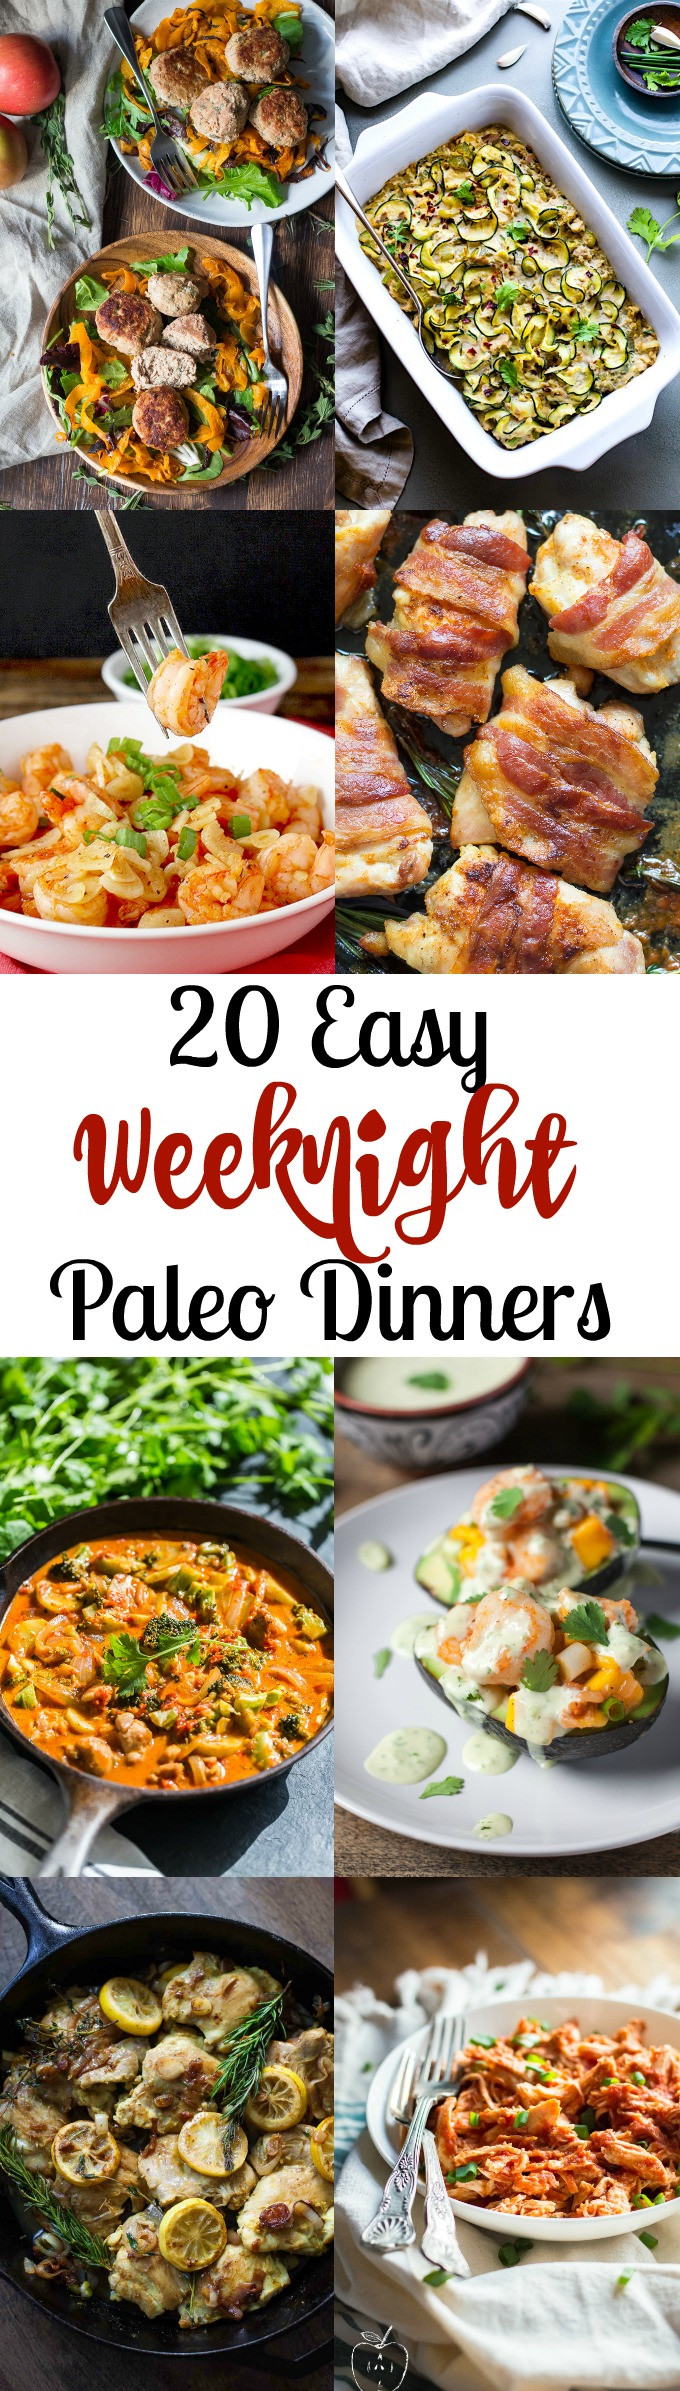 Simple Paleo Dinners
 20 Easy Paleo Dinners for Weeknights